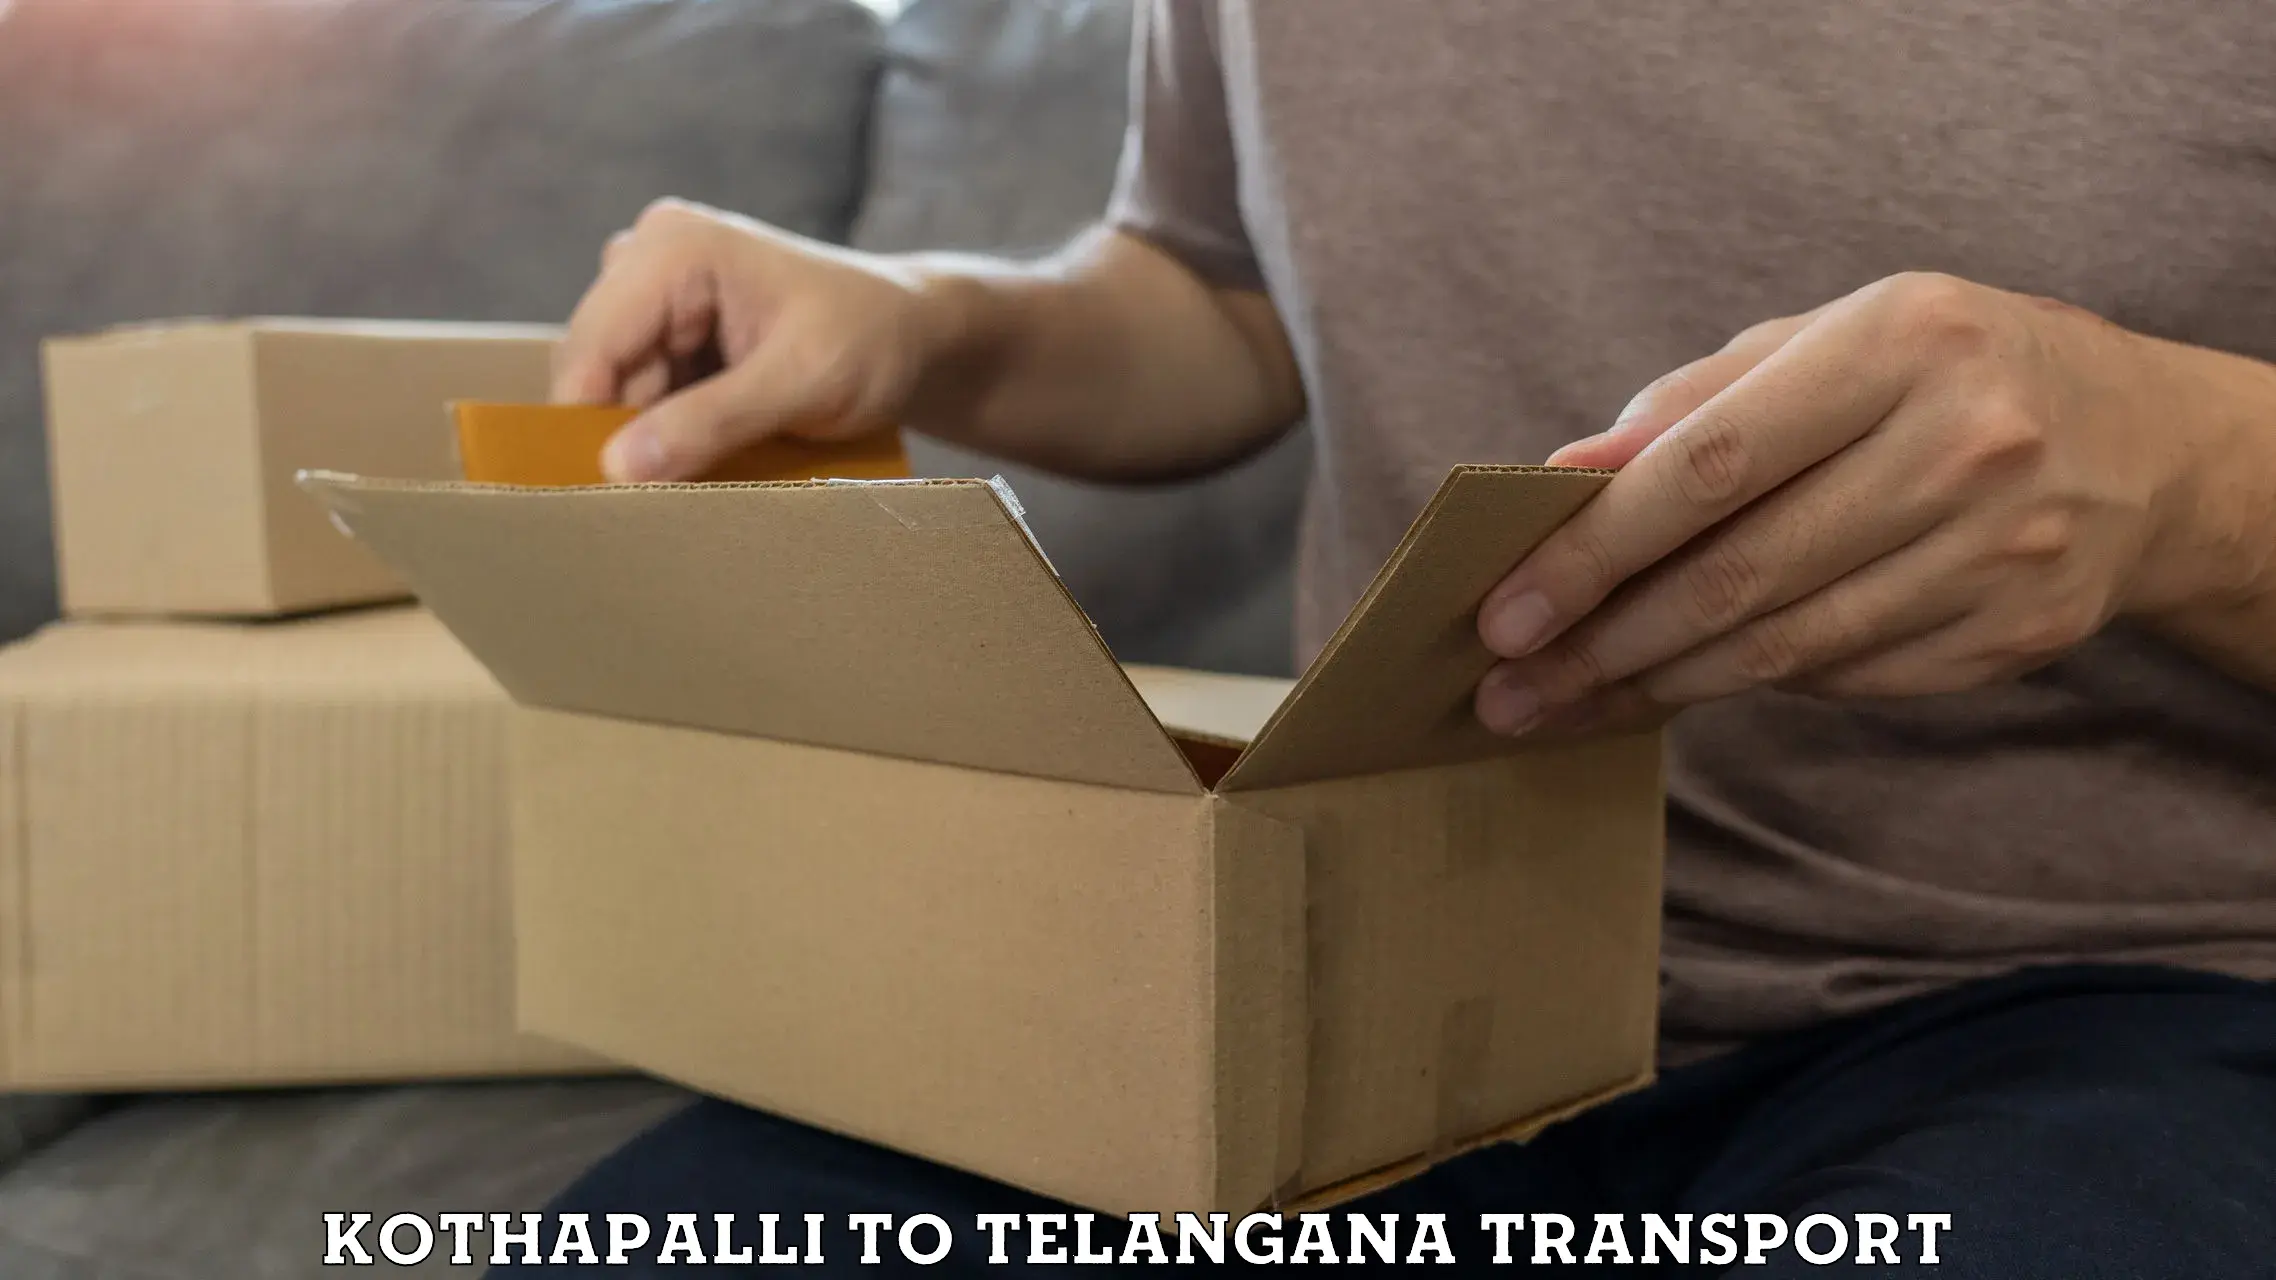 Truck transport companies in India Kothapalli to Wanaparthy